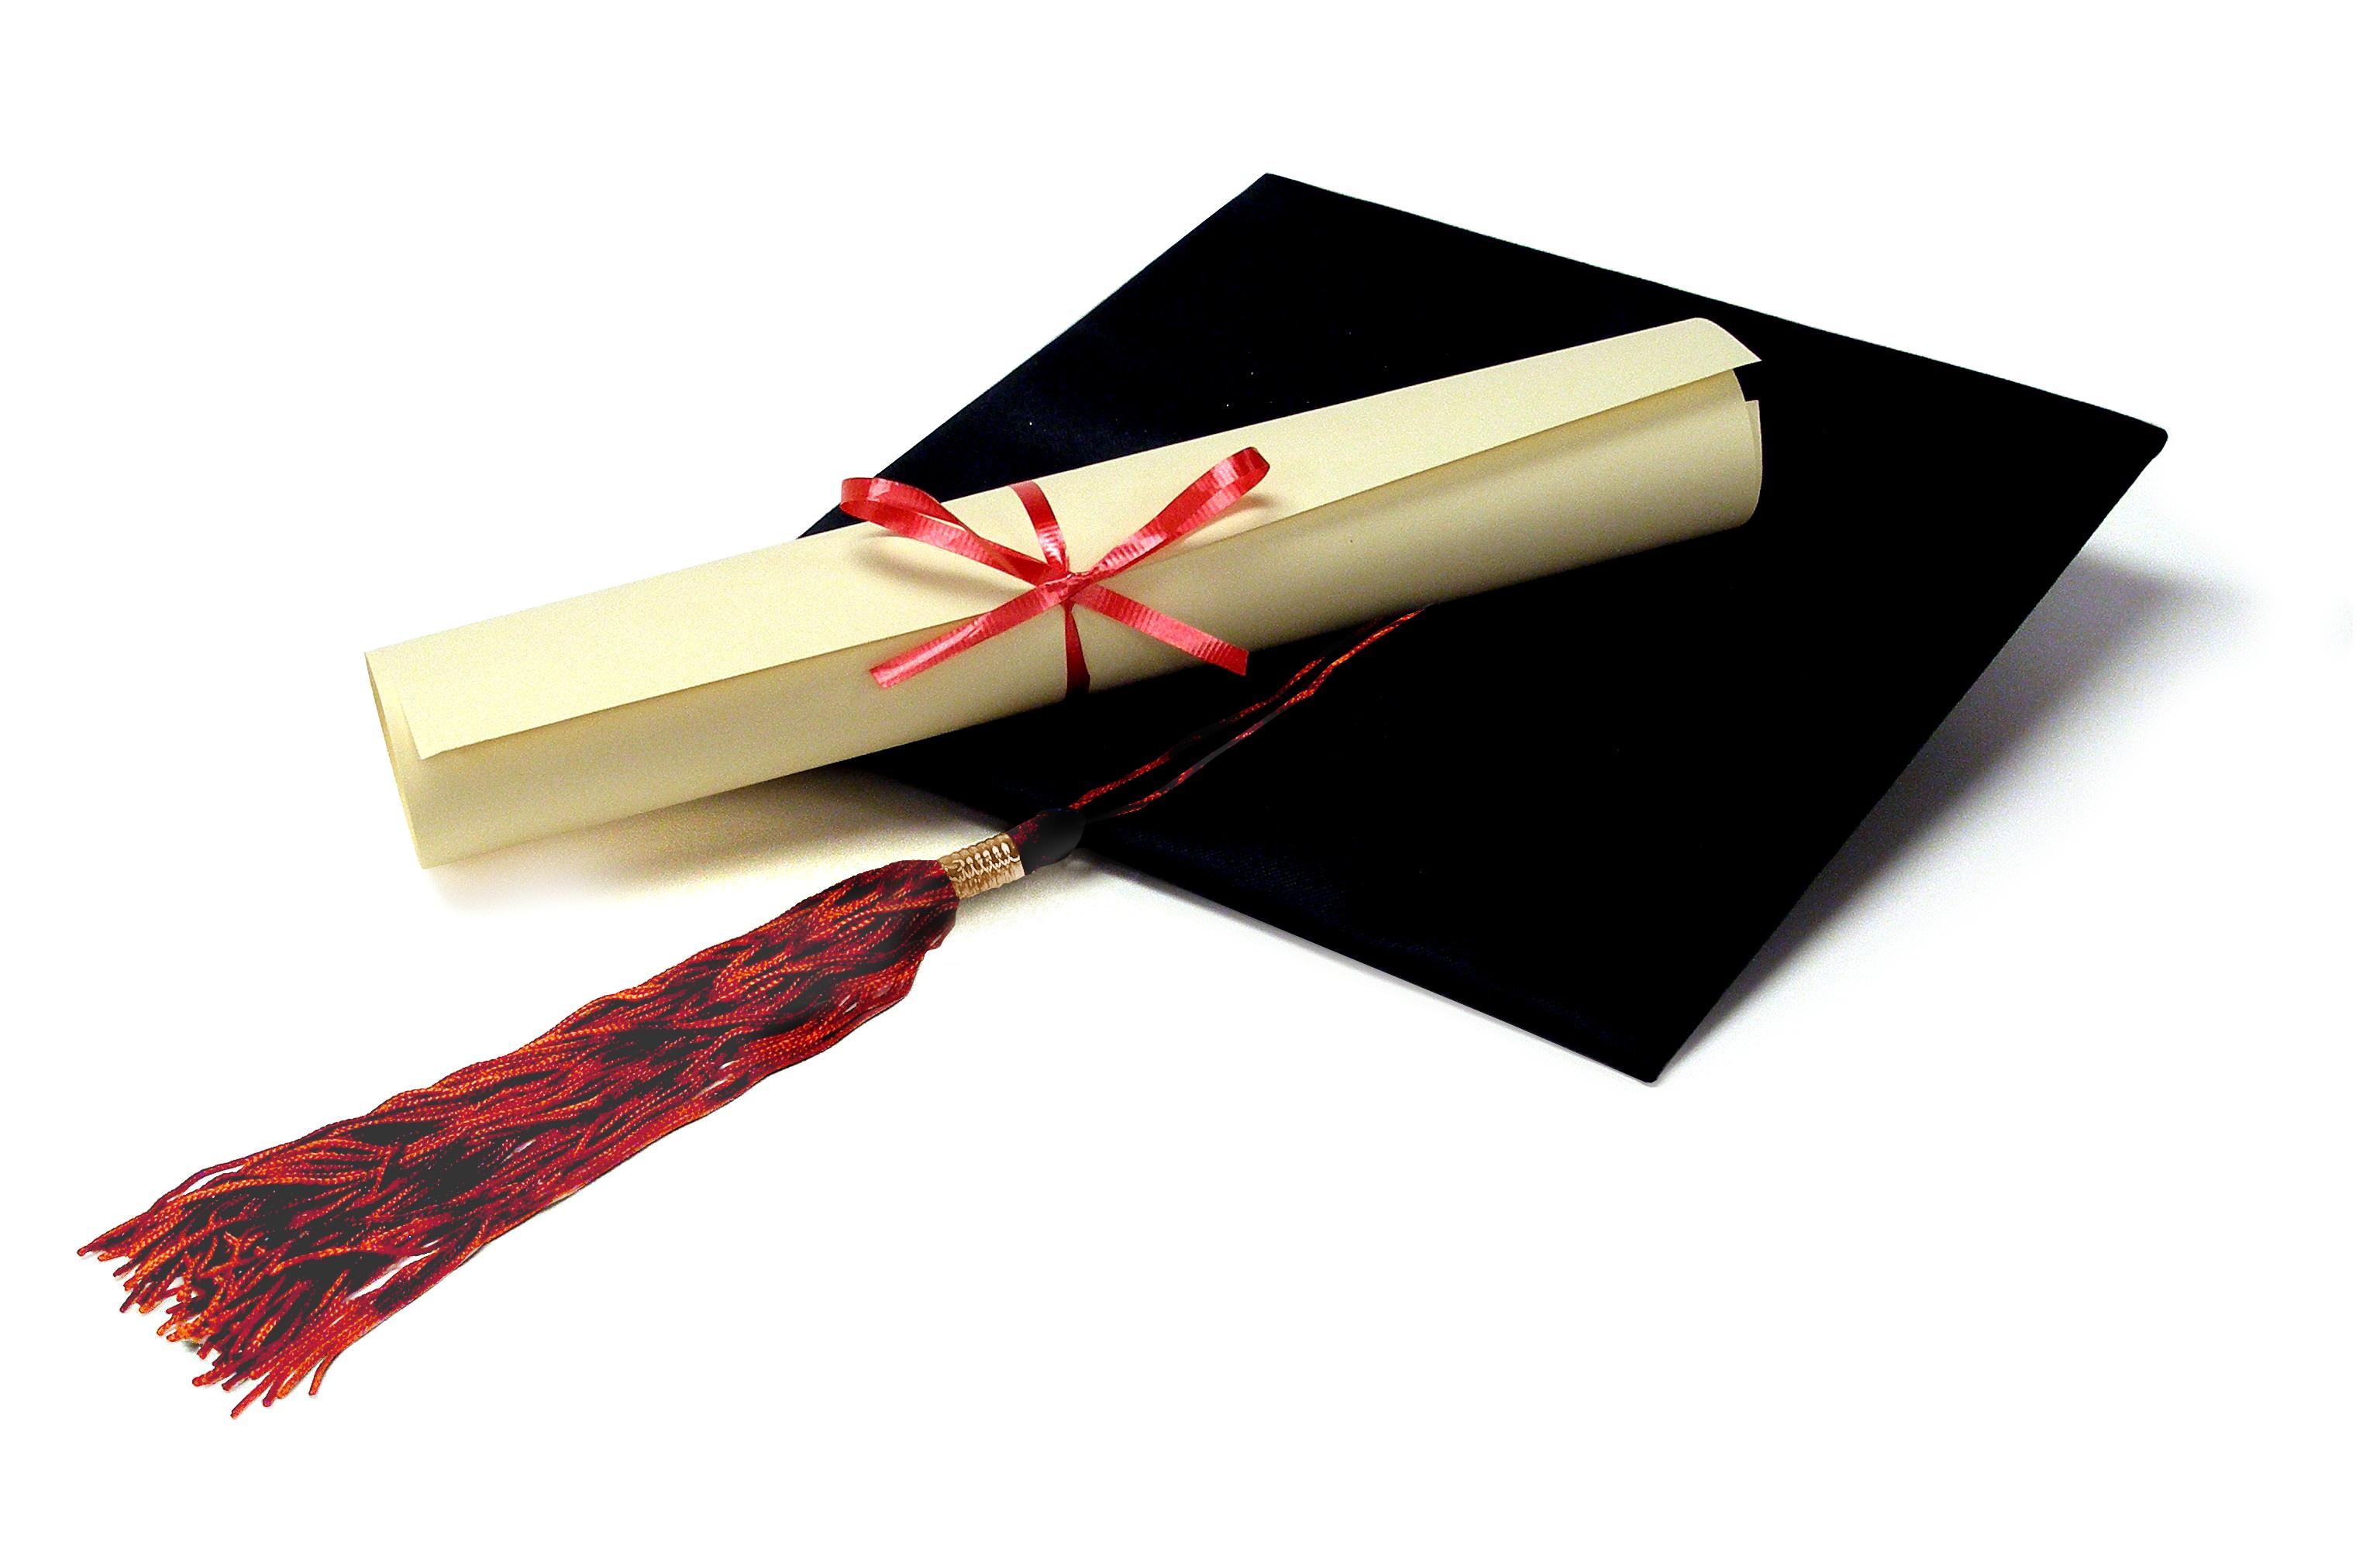 What is a college diploma?